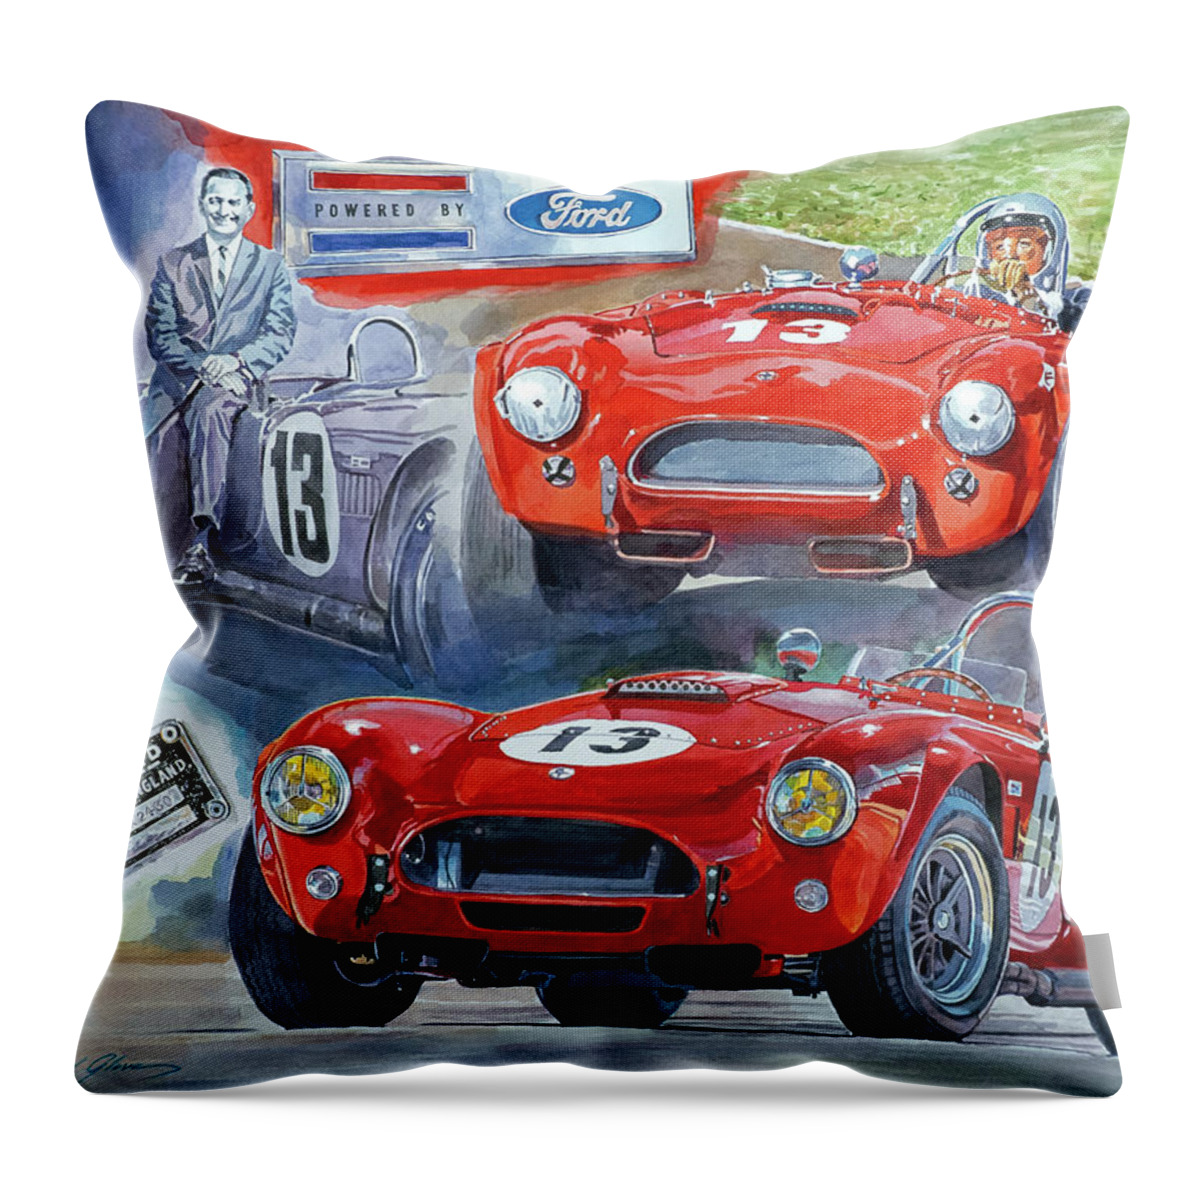 Ac Cobra Throw Pillow featuring the painting TOM PAYNE'S No 13 289 COBRA COMPETITION by David Lloyd Glover